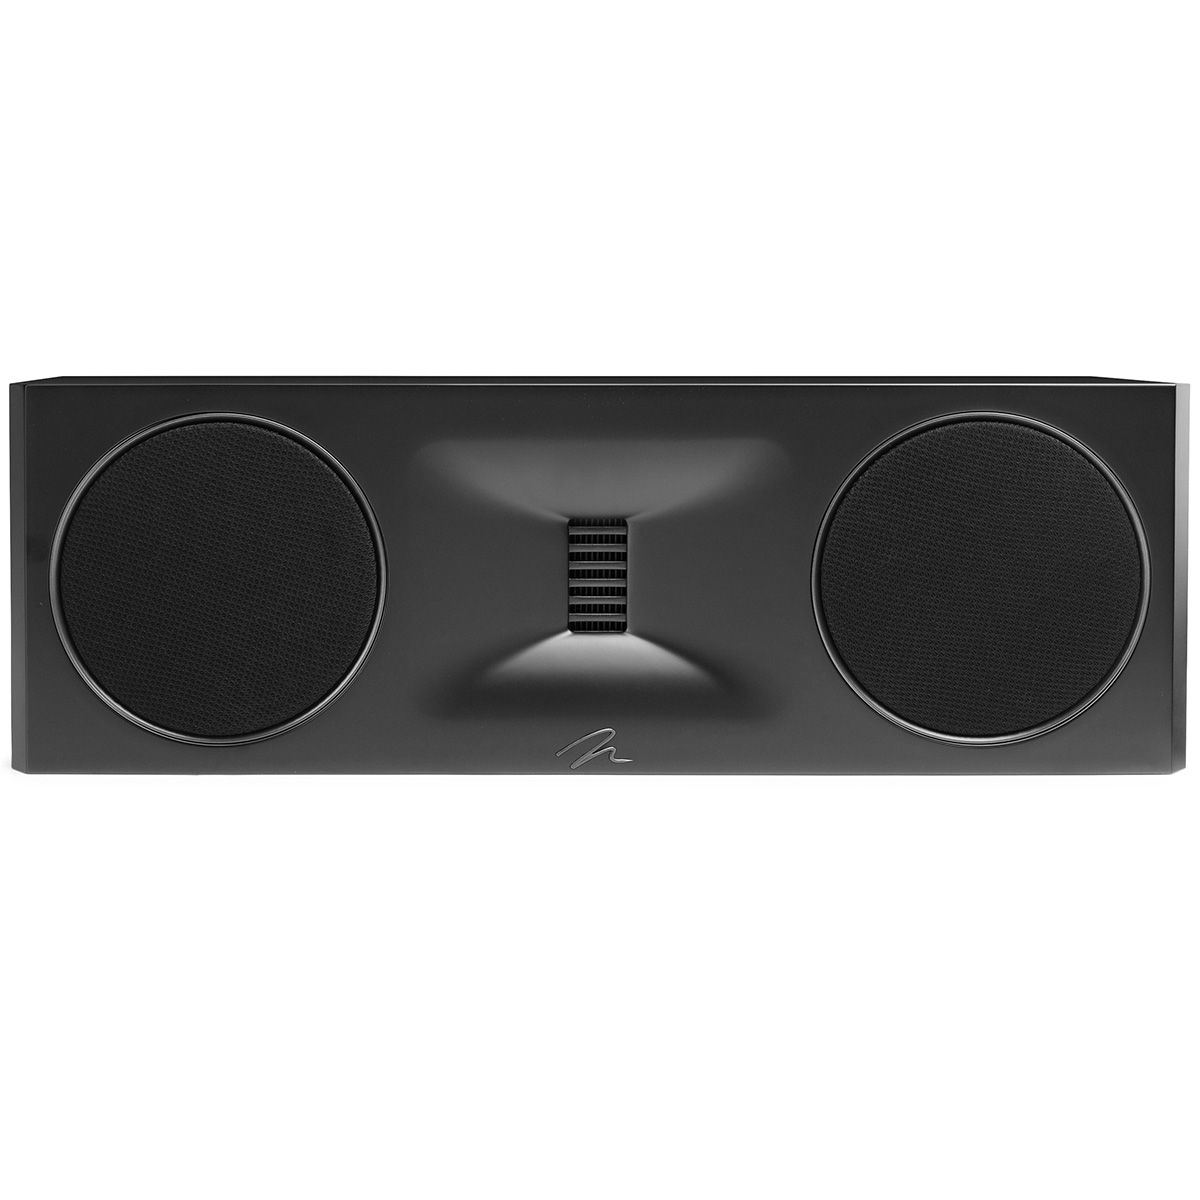 MartinLogan XT C100 center channel speaker front view in black with grilles